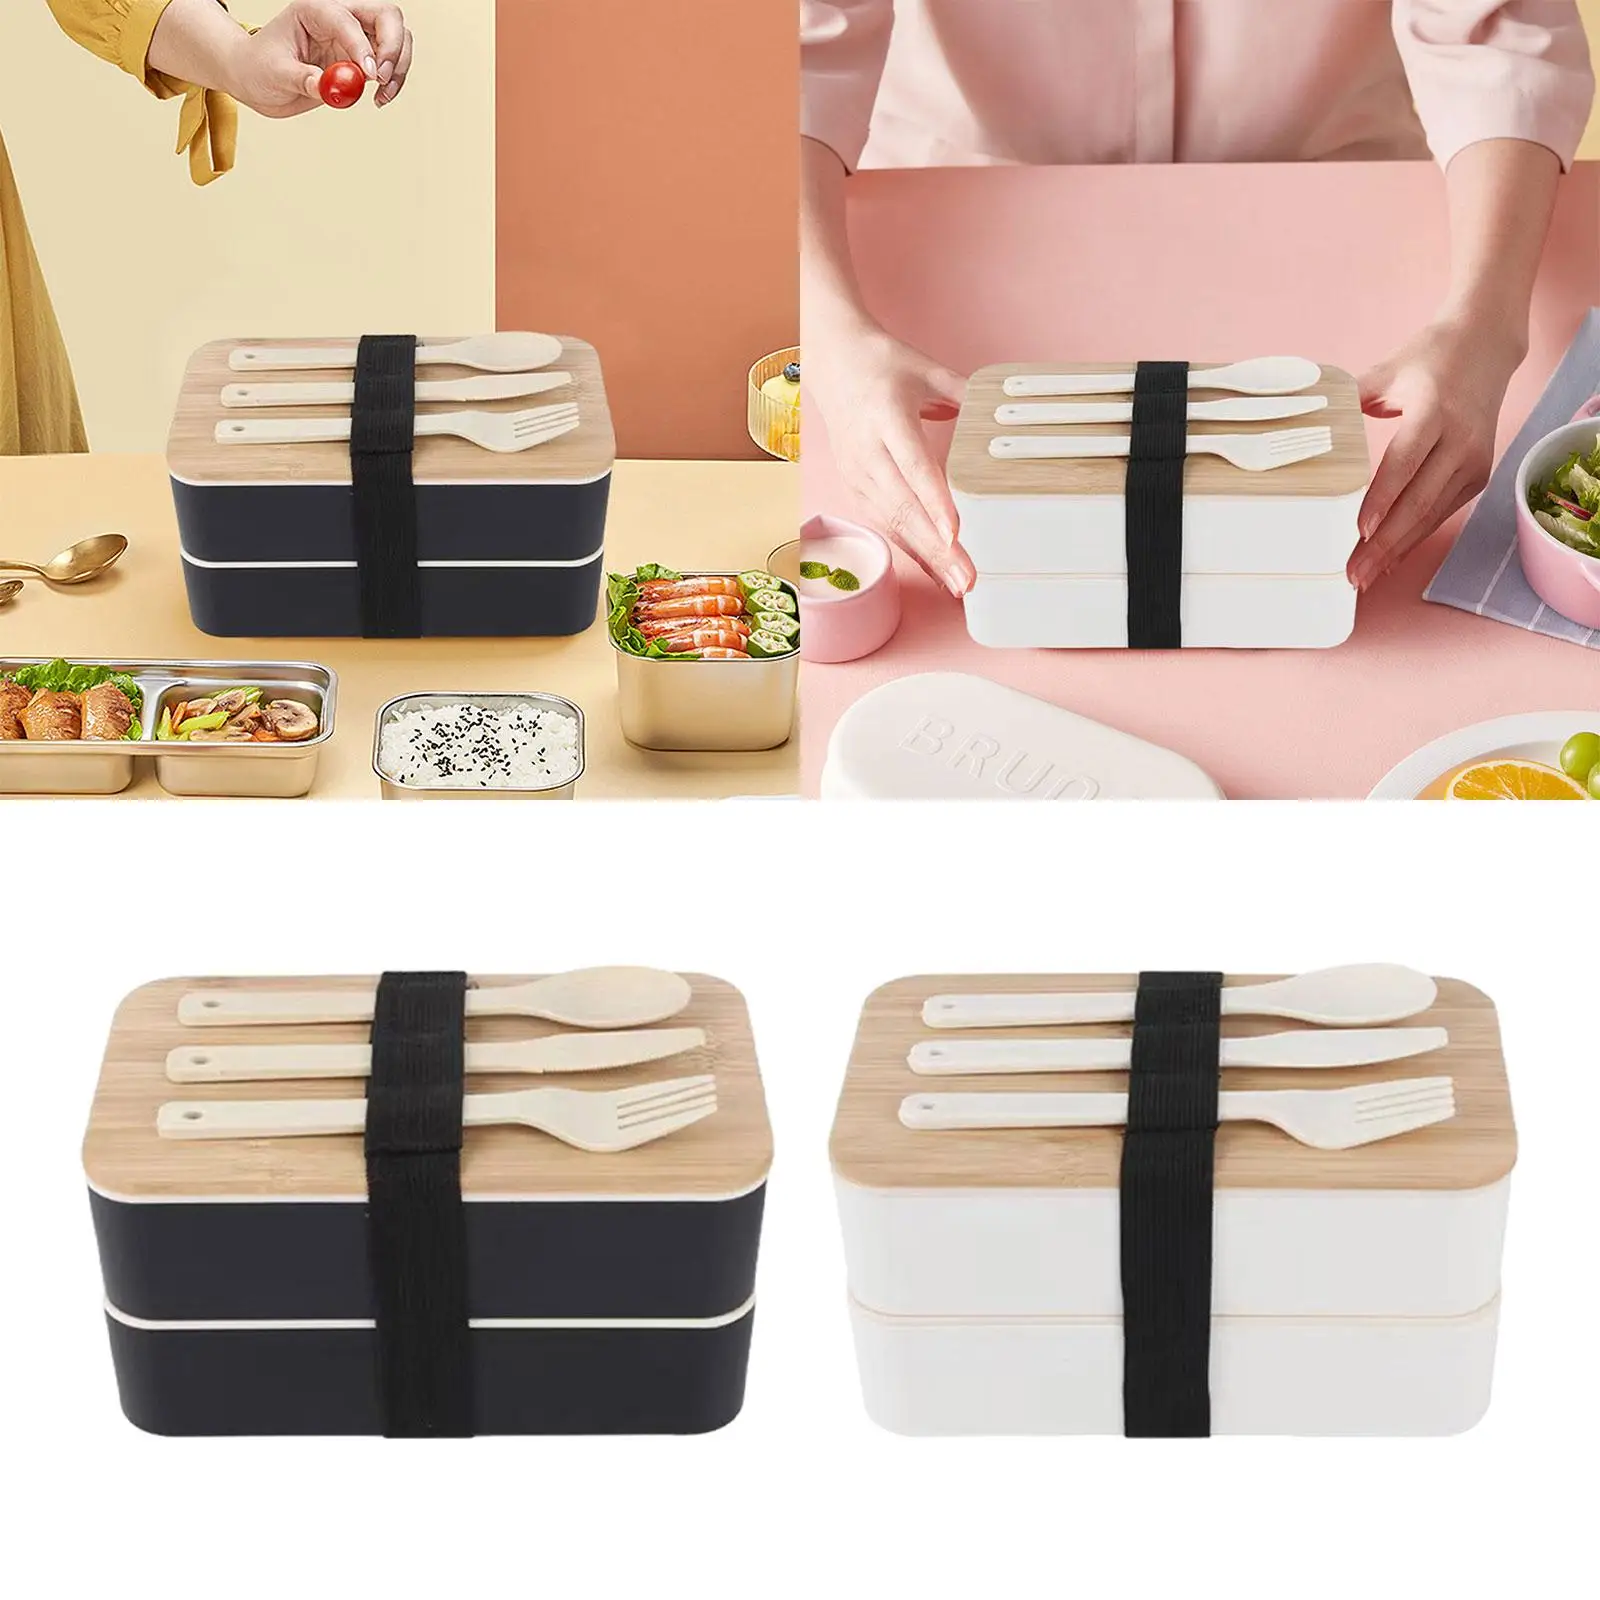 Bento Box Portable Tableware Bowl Eastic Band Snack Serving Box Lunch Container for Hiking Restaurant Travel Picnics Climbing